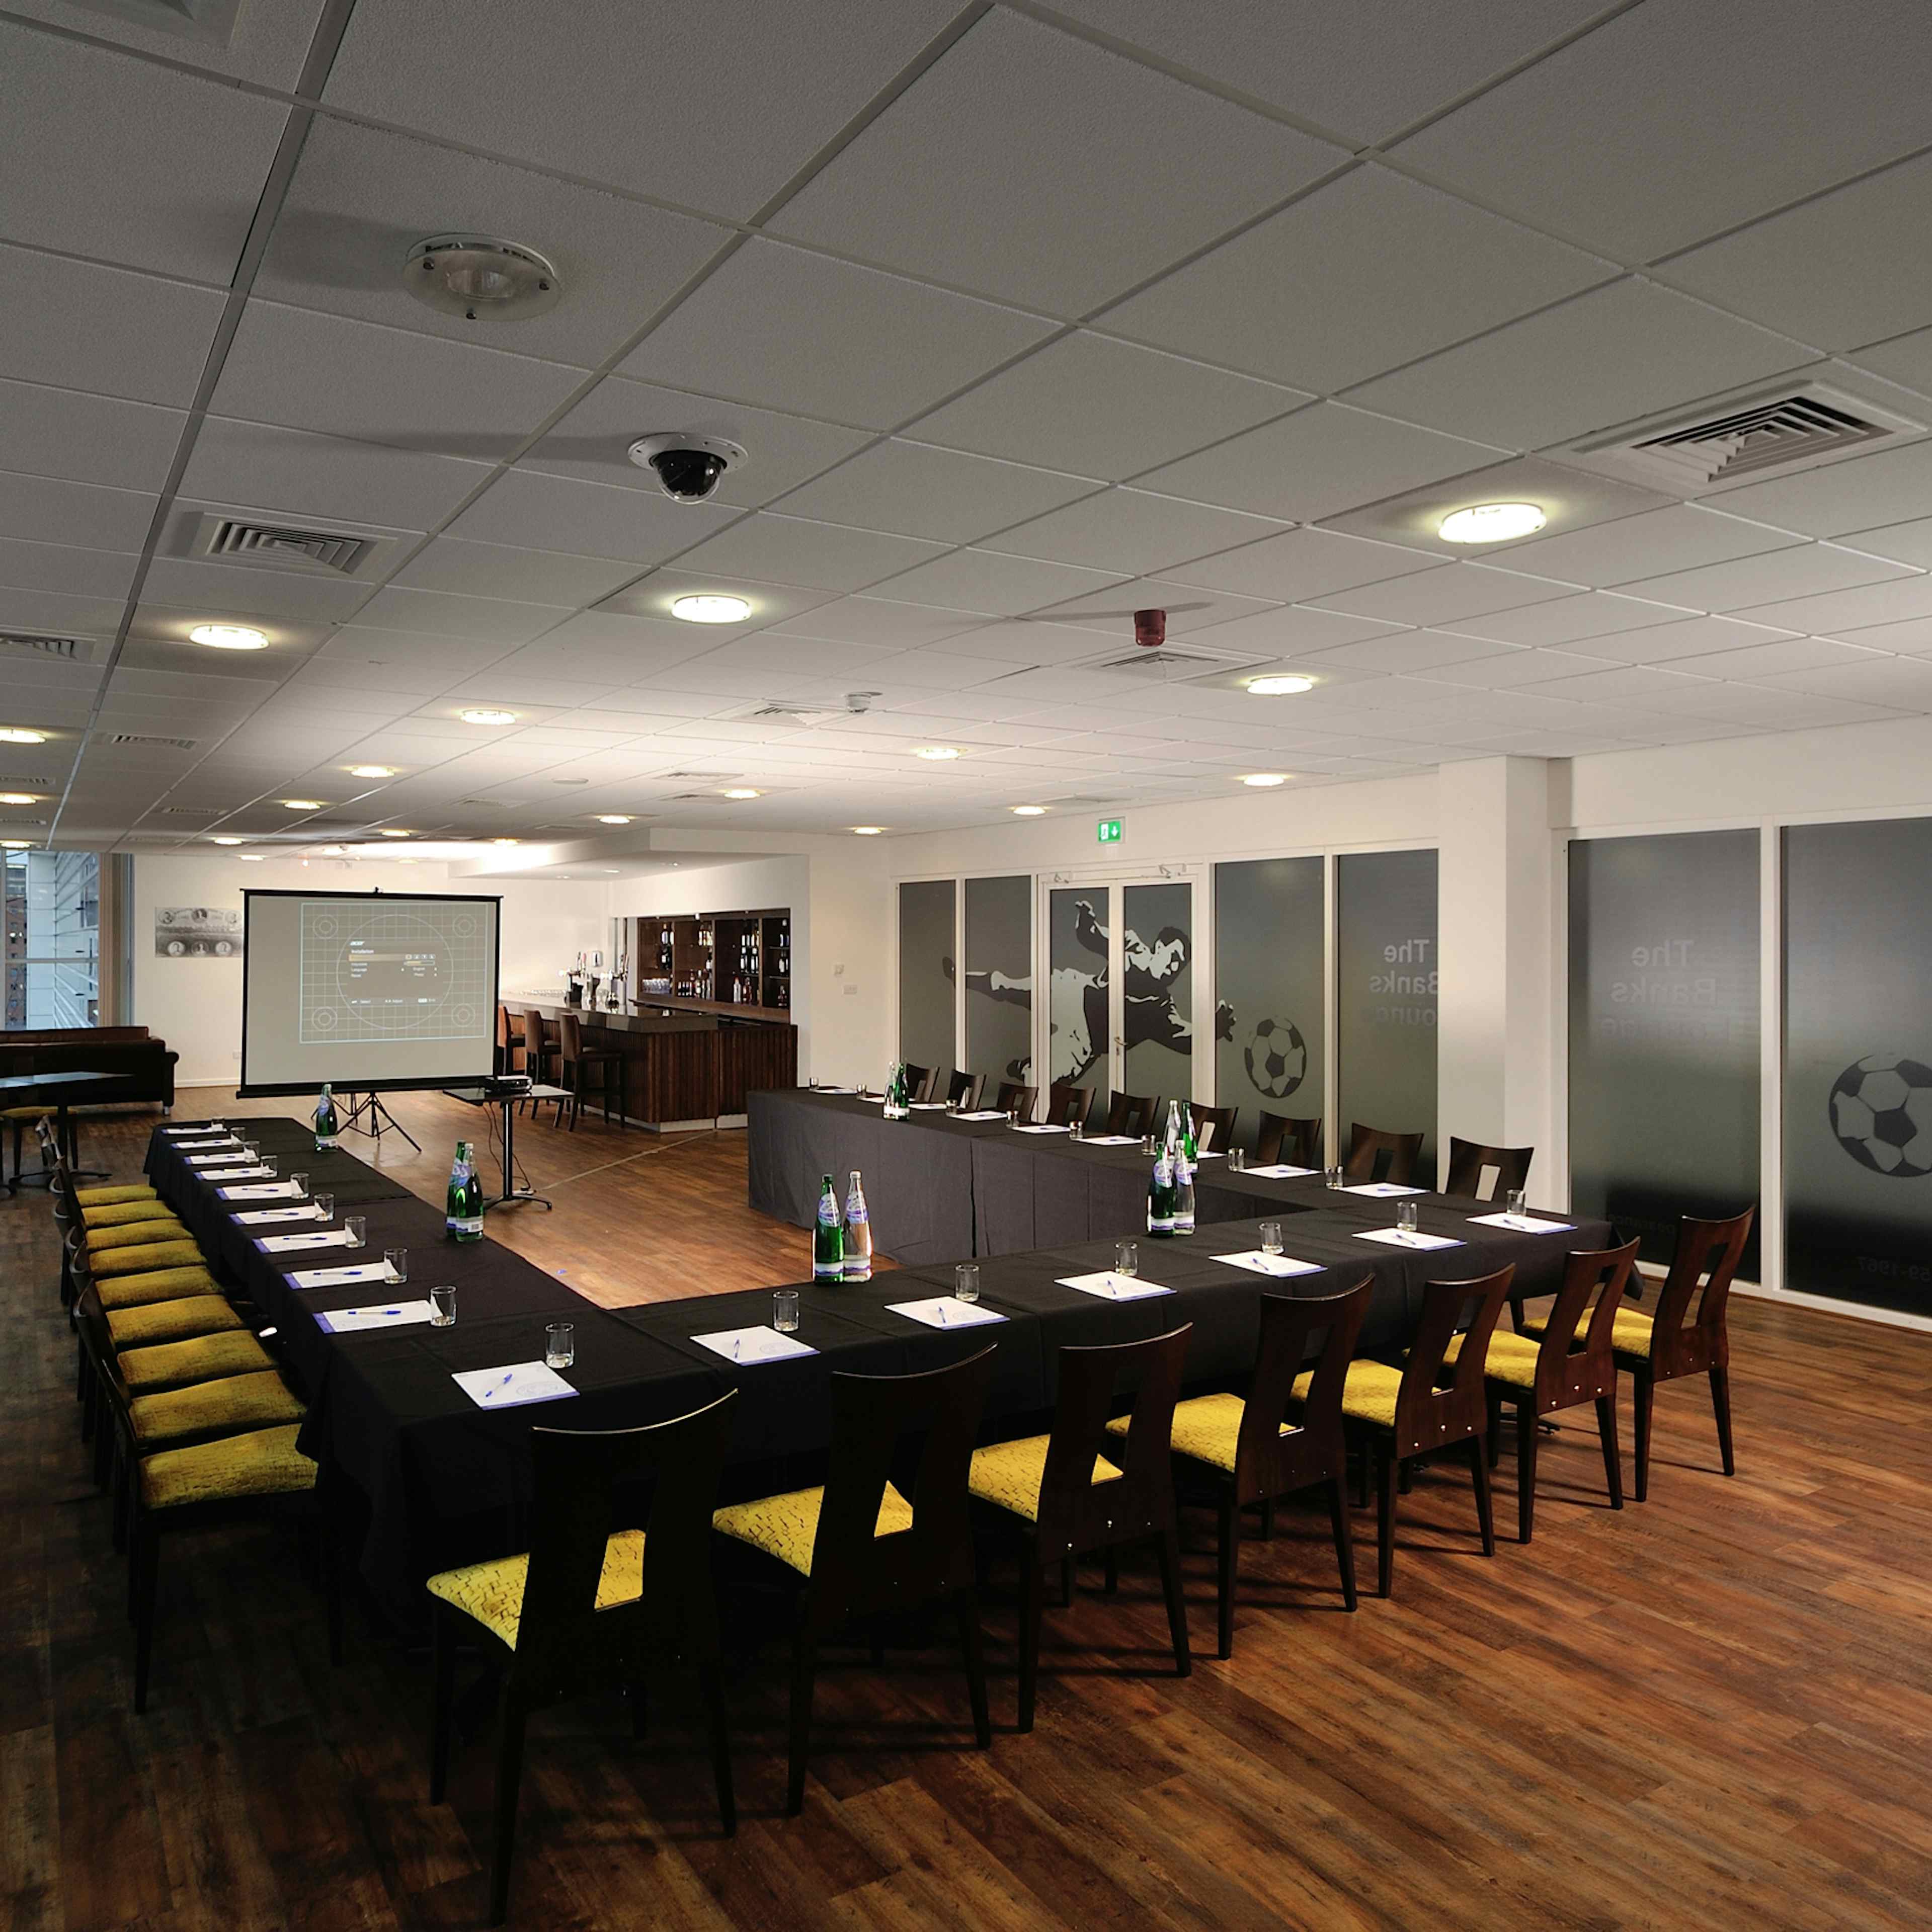 Leicester City Football Club - Banks Lounge image 1